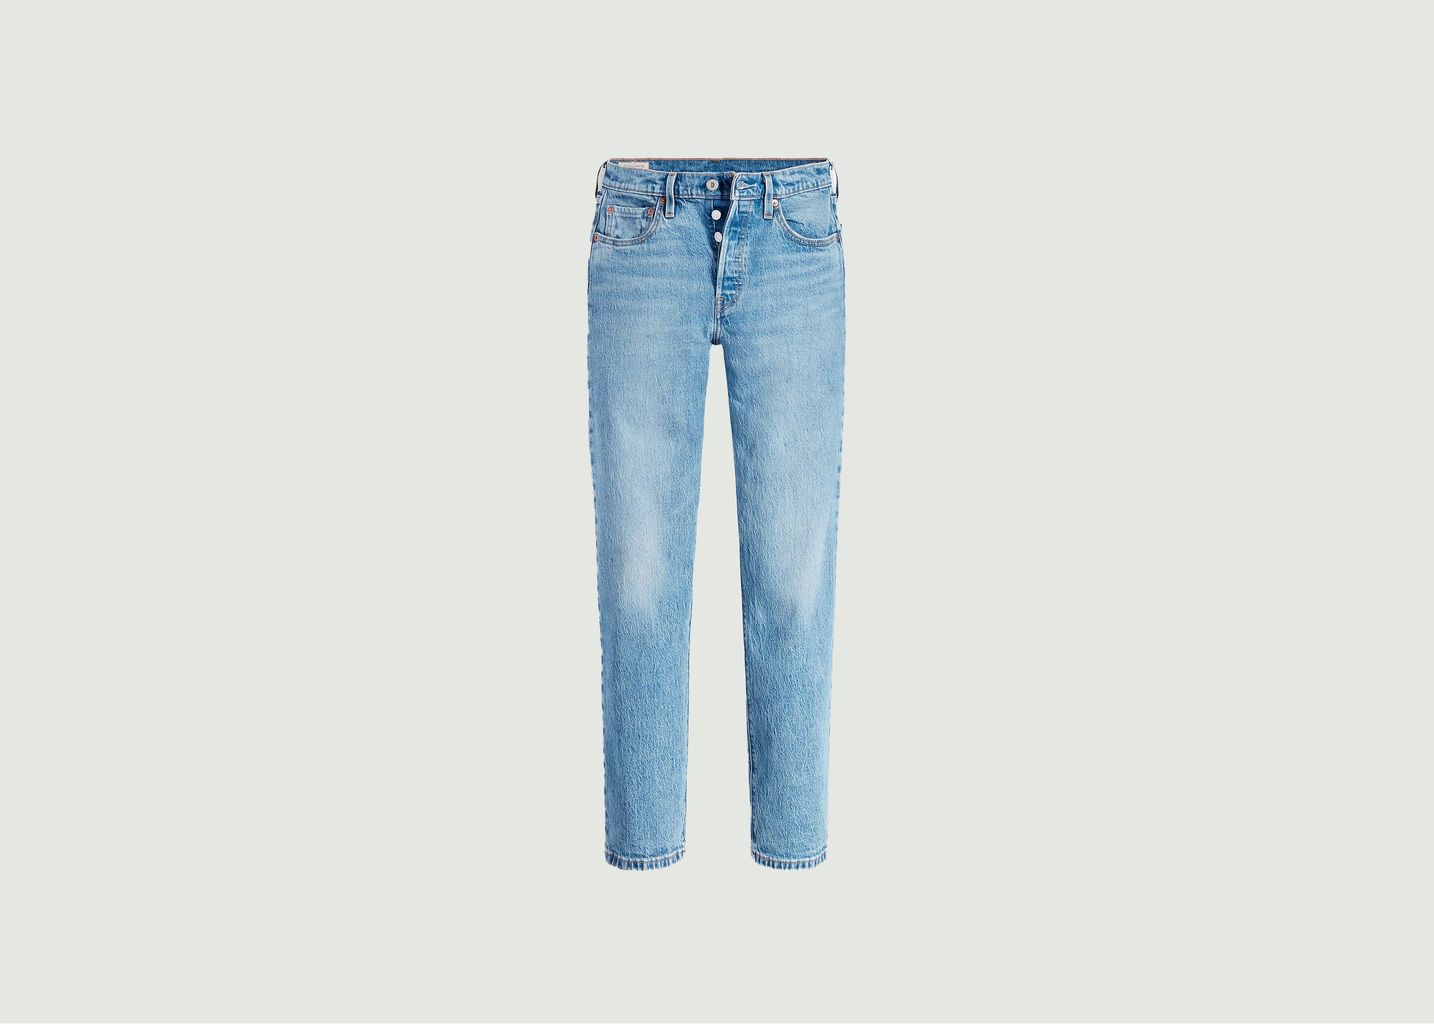 501 Jeans - Levi's Red Tab